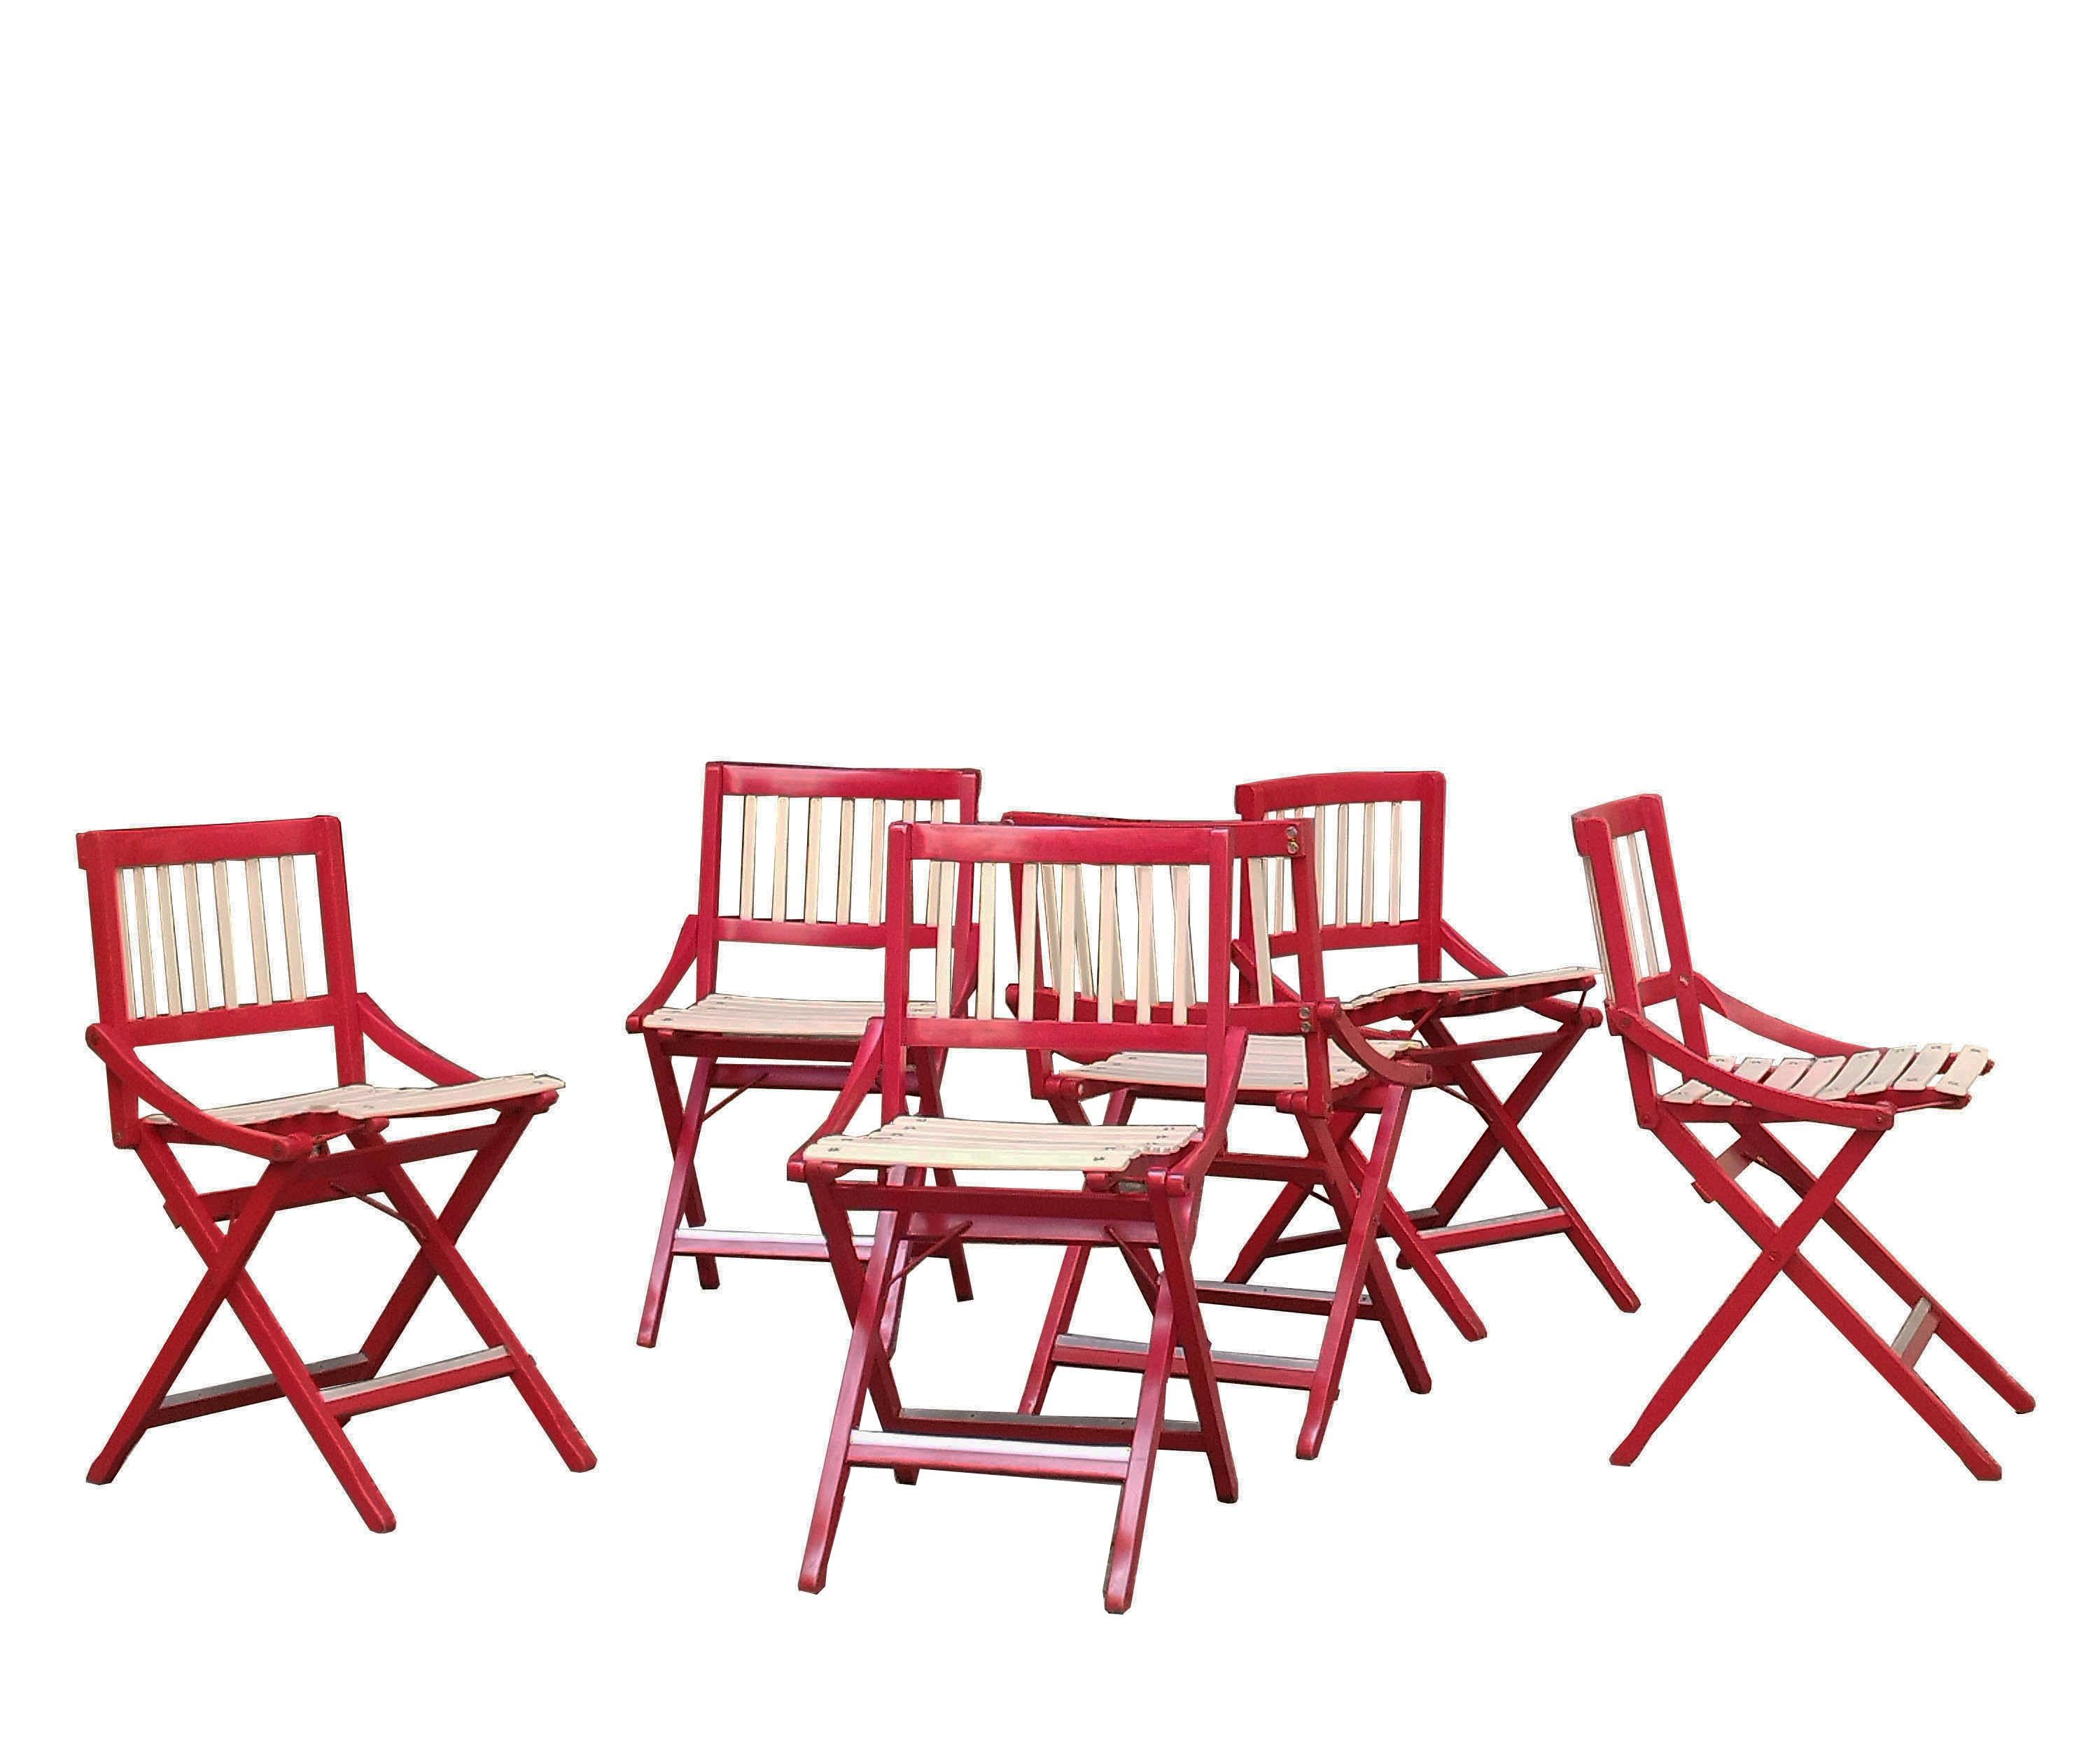 Garden set consisting of 6 folding chairs Mod. 